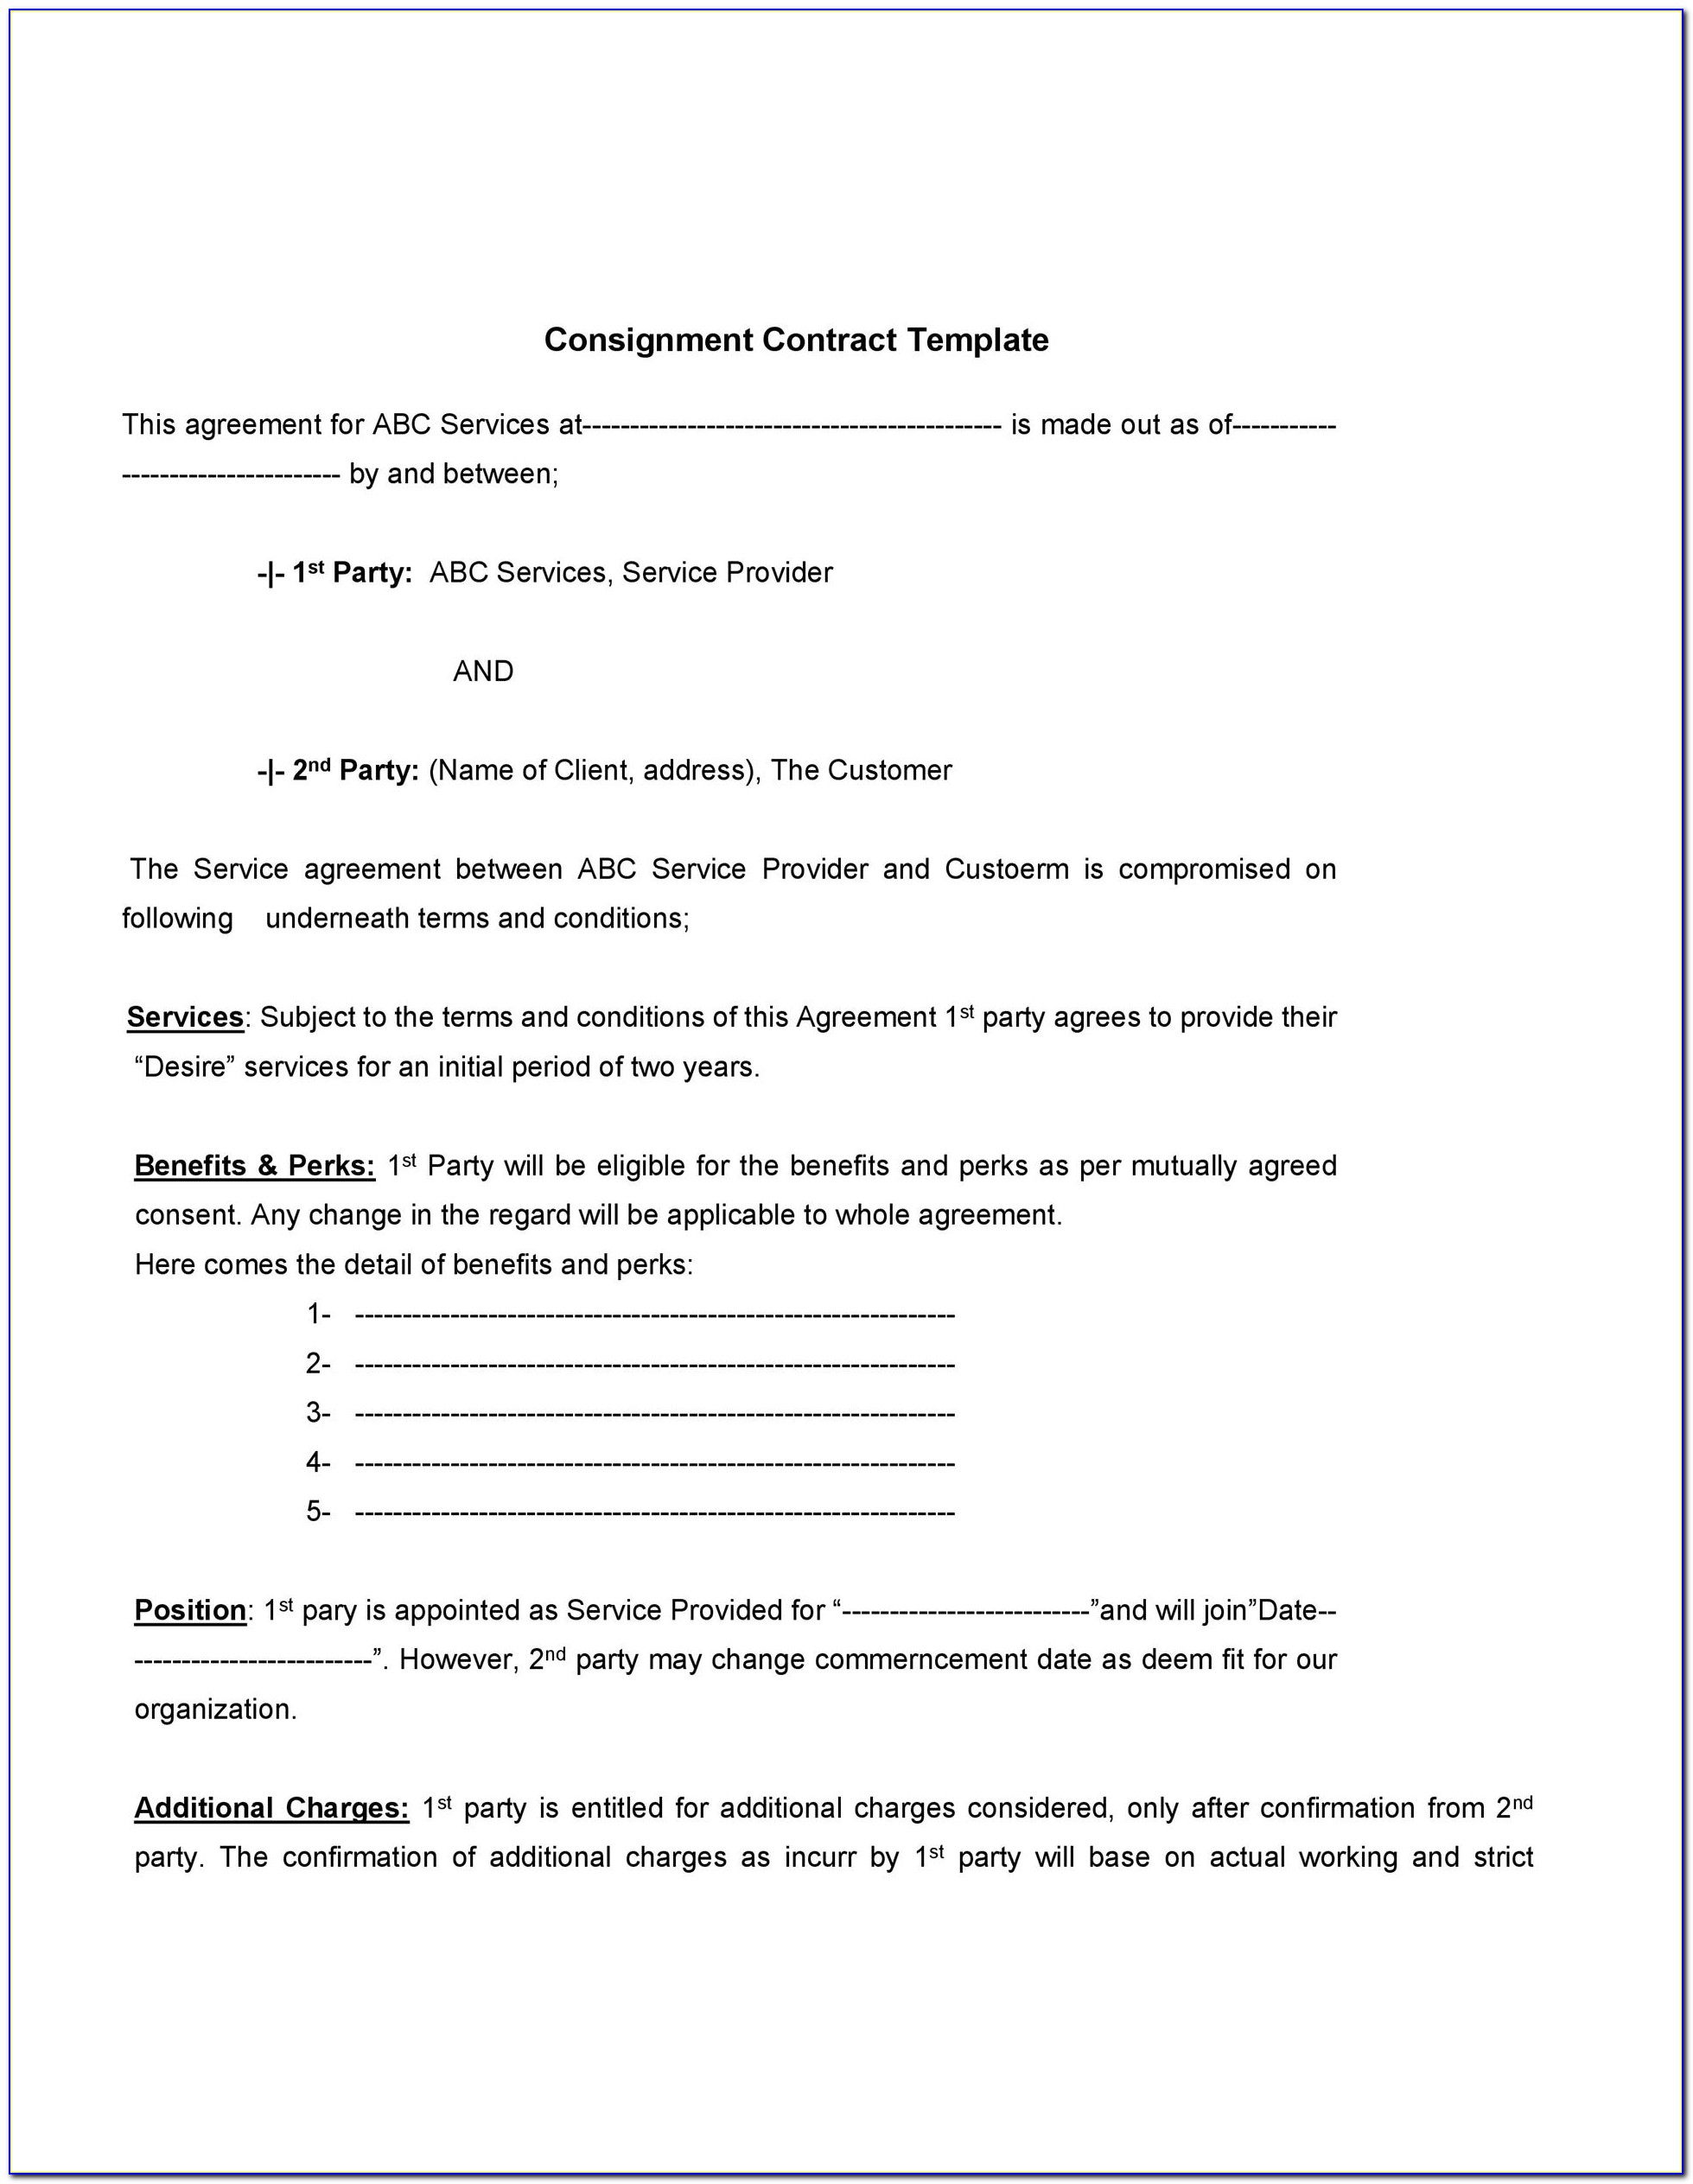 Consignment Store Contract Samples